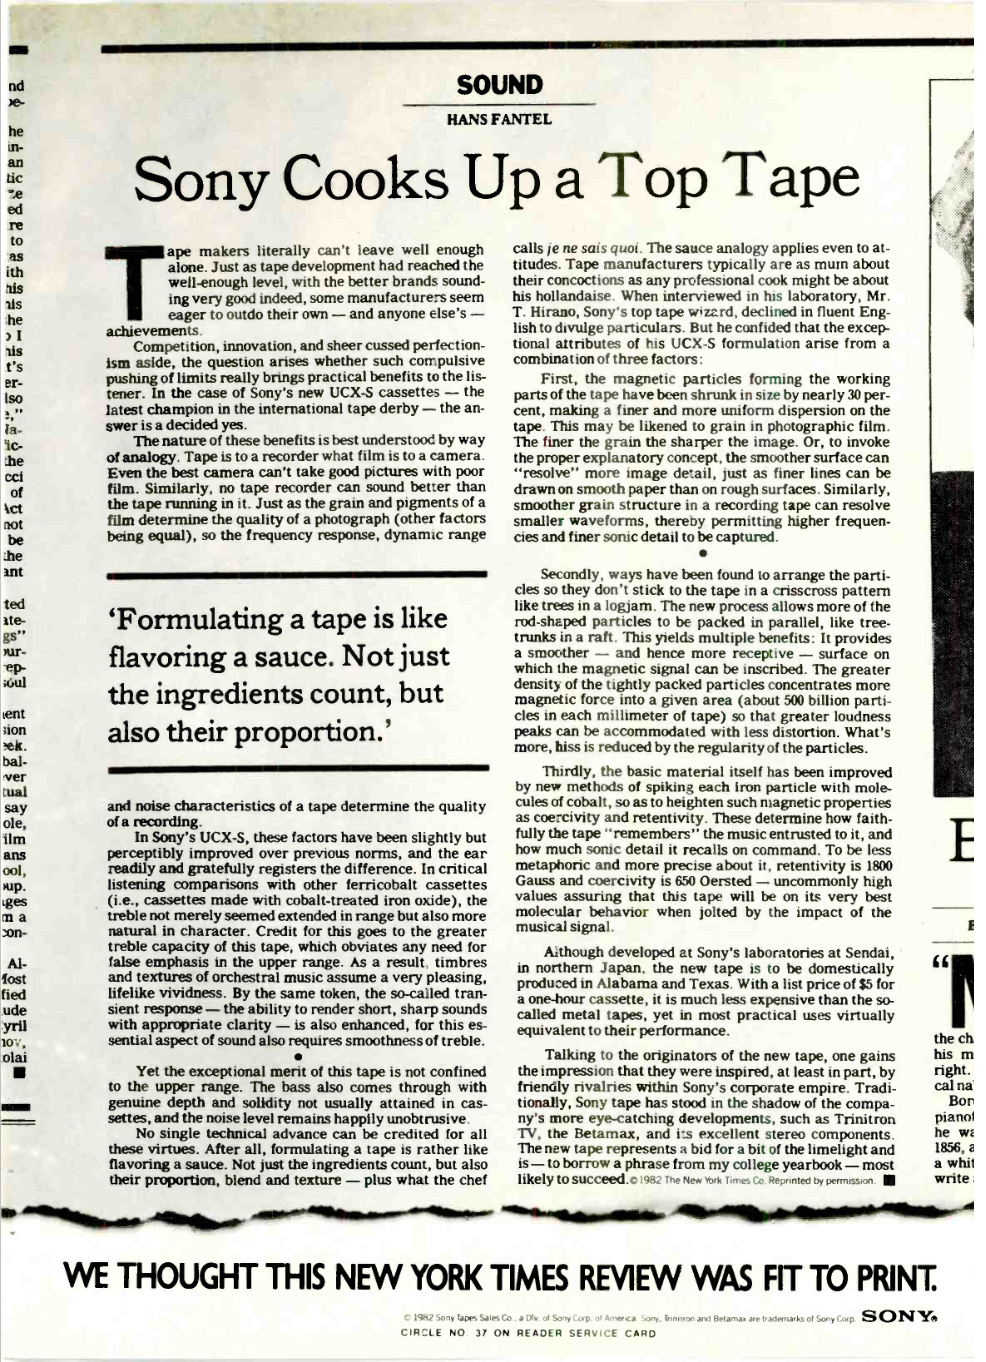 HiFi-Stereo-Review-1982-Sony.png